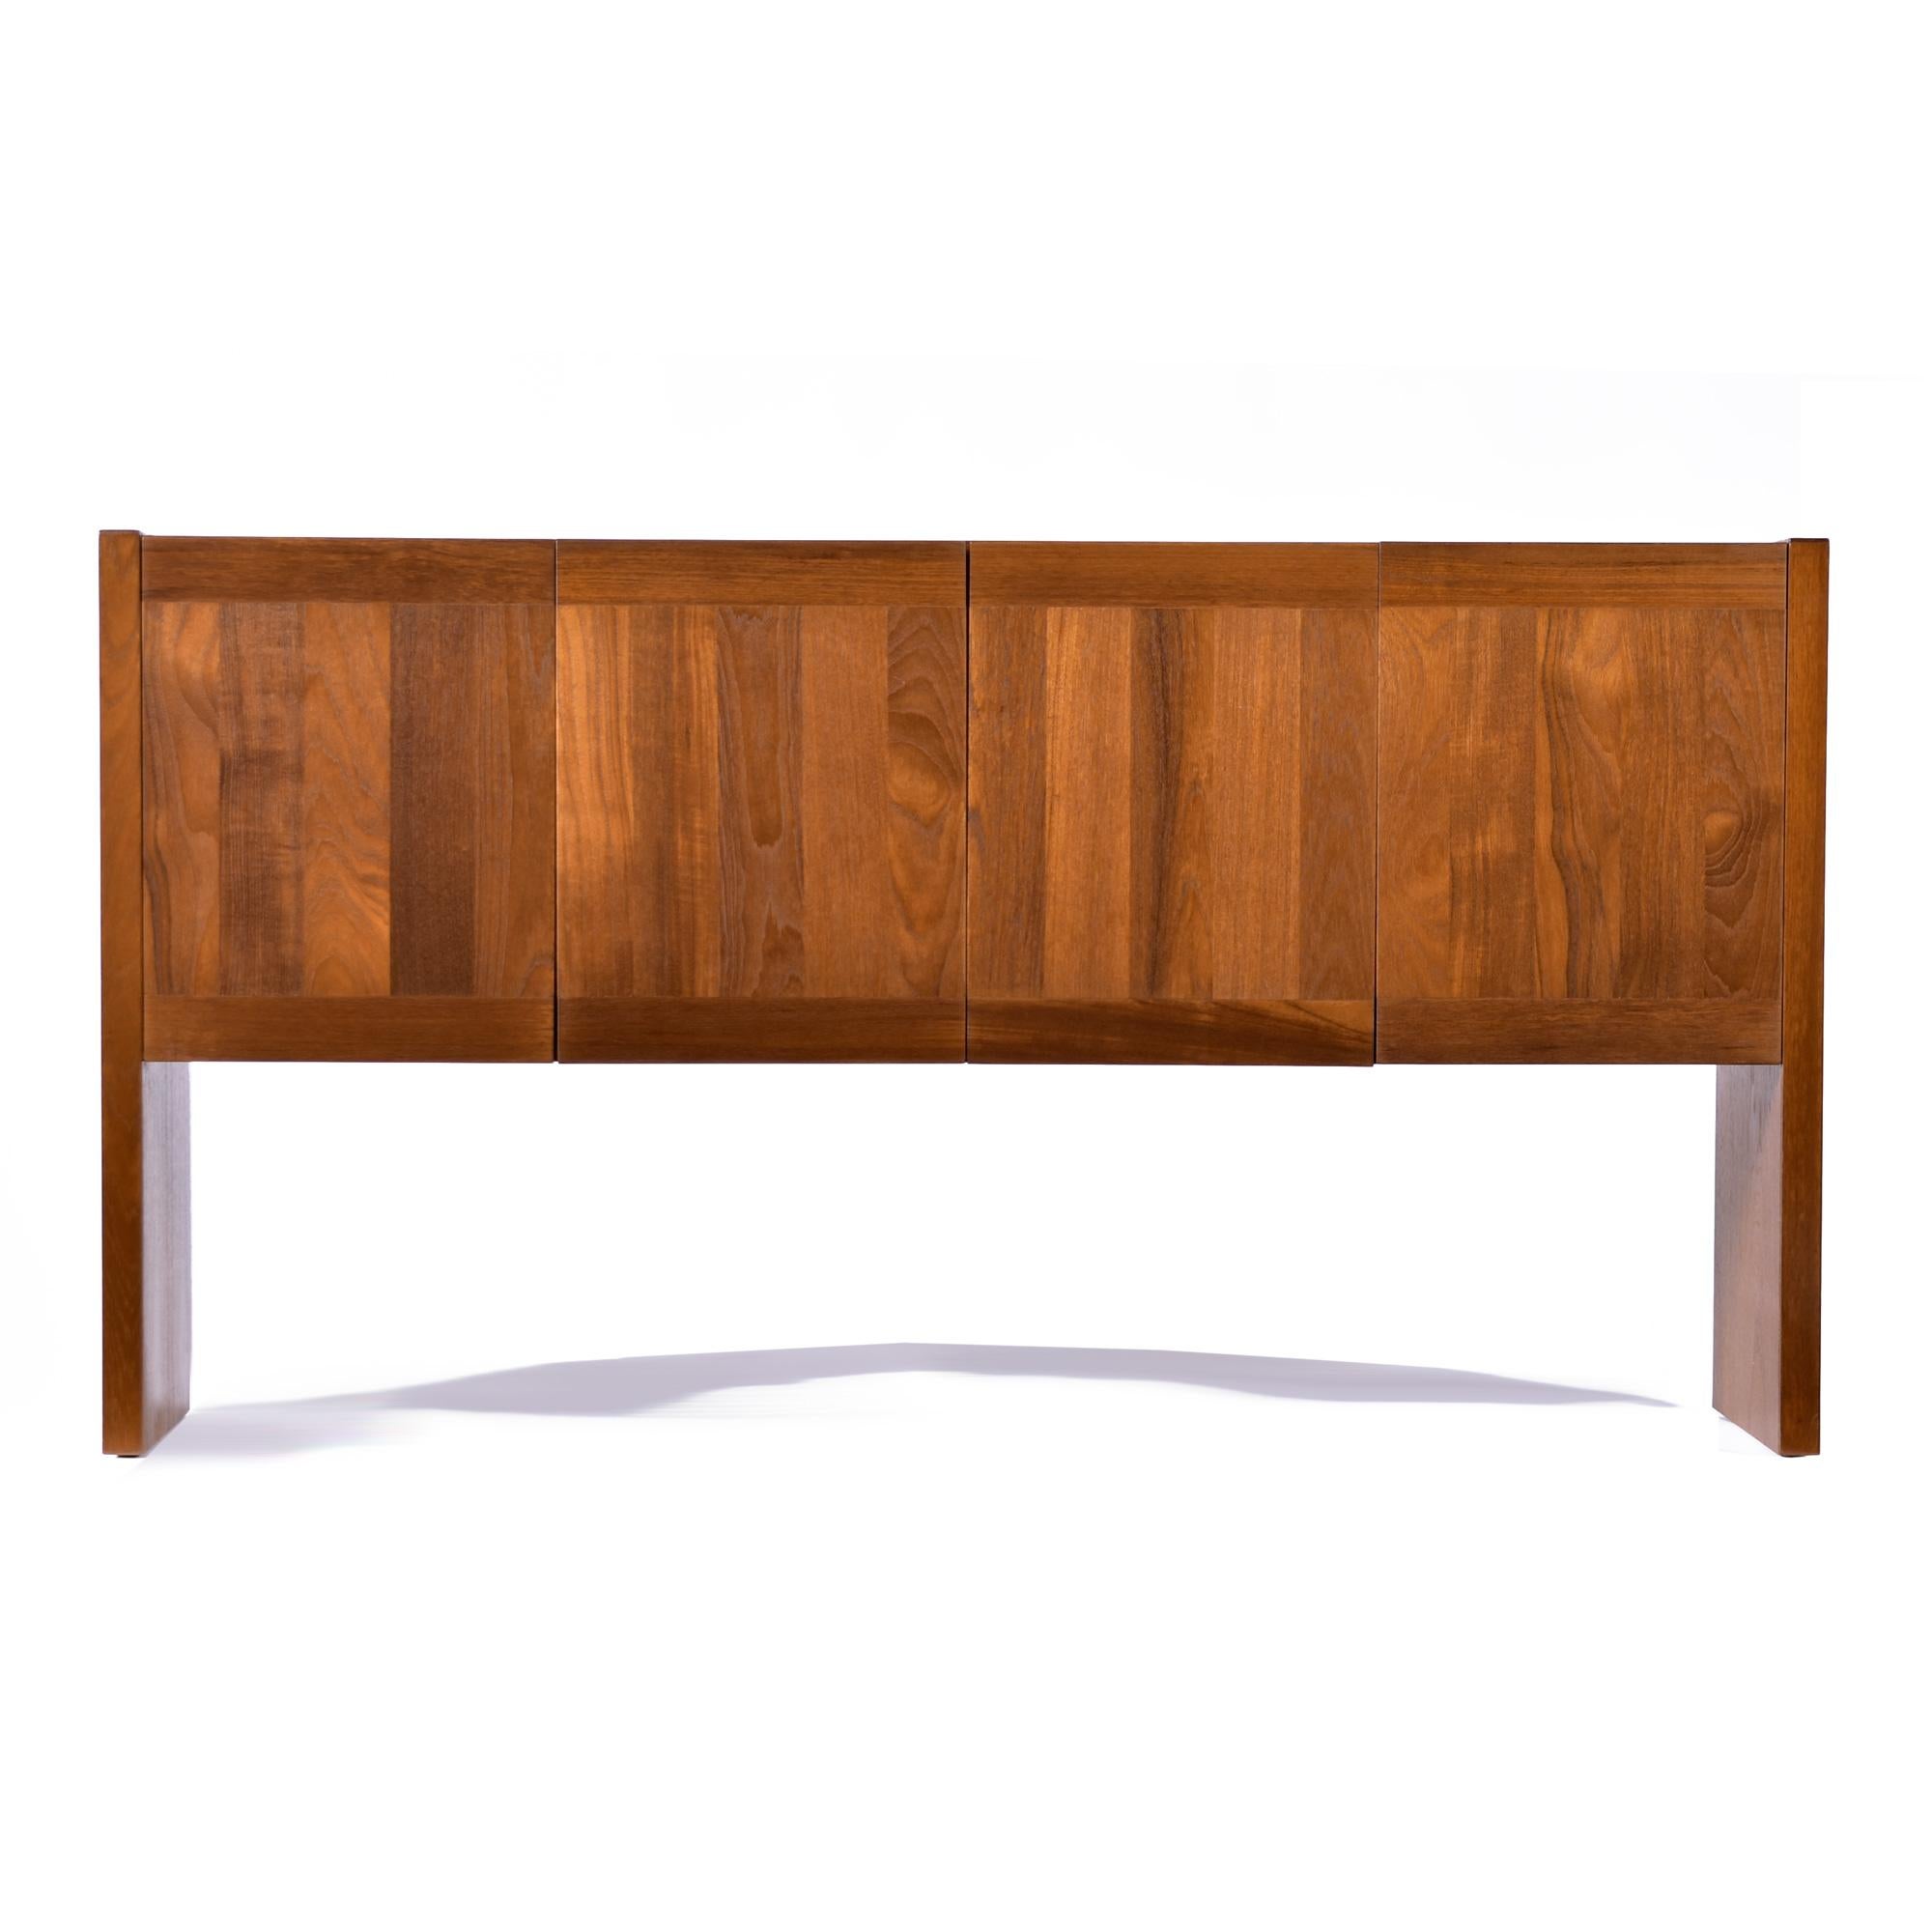 Exquisitely crafted vintage 1970s Danish teak credenza by Dyrlund. This is the perfect media center. The large cabinet spaces provide amble room for 12 inch LP records and components. Mount your flat screen above or place on the top with a stand. 